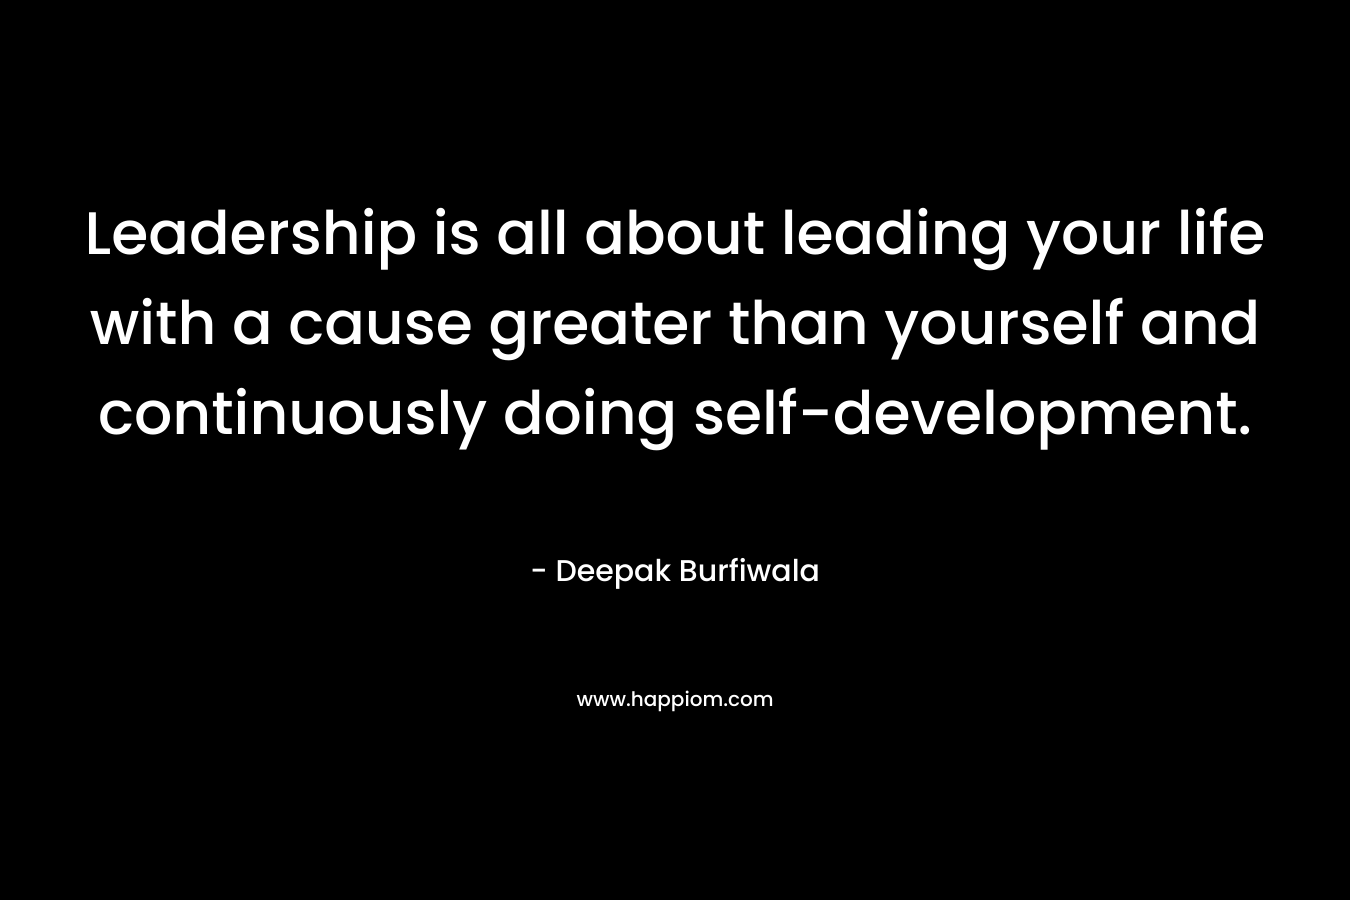 Leadership is all about leading your life with a cause greater than yourself and continuously doing self-development. – Deepak Burfiwala